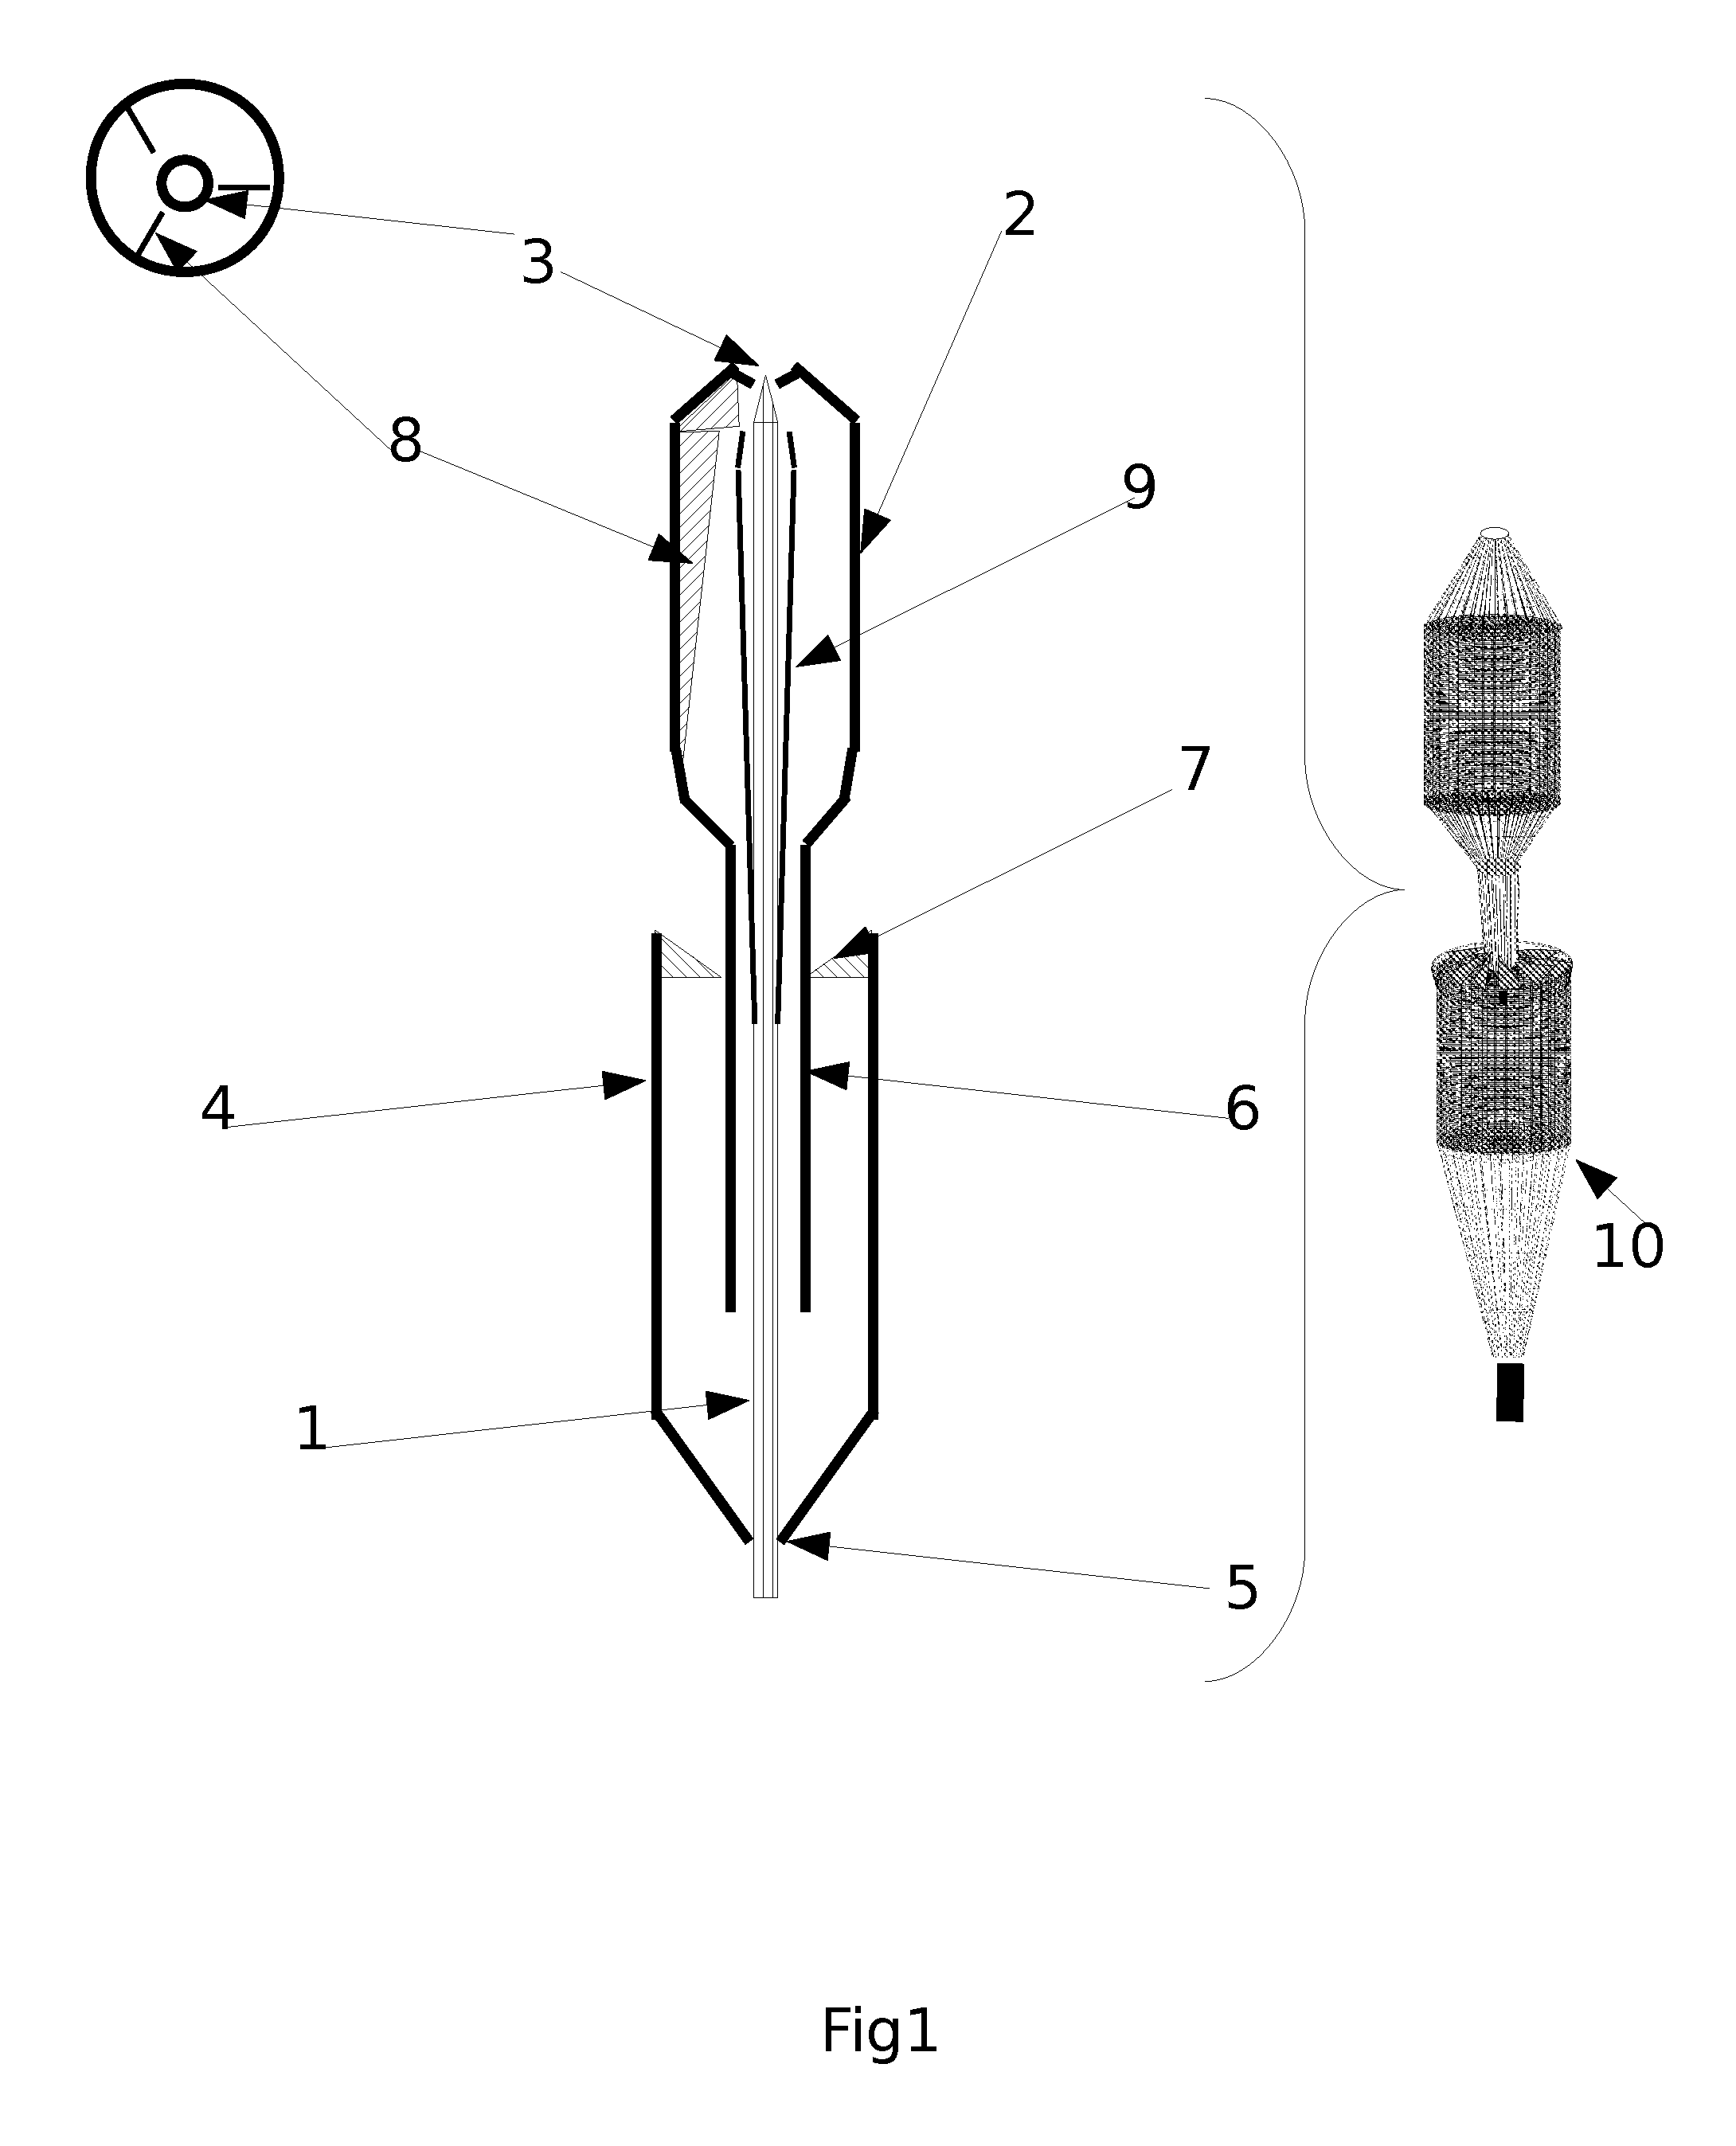 Method for the desalination or purification of water by distillation of a spray (spray pump)